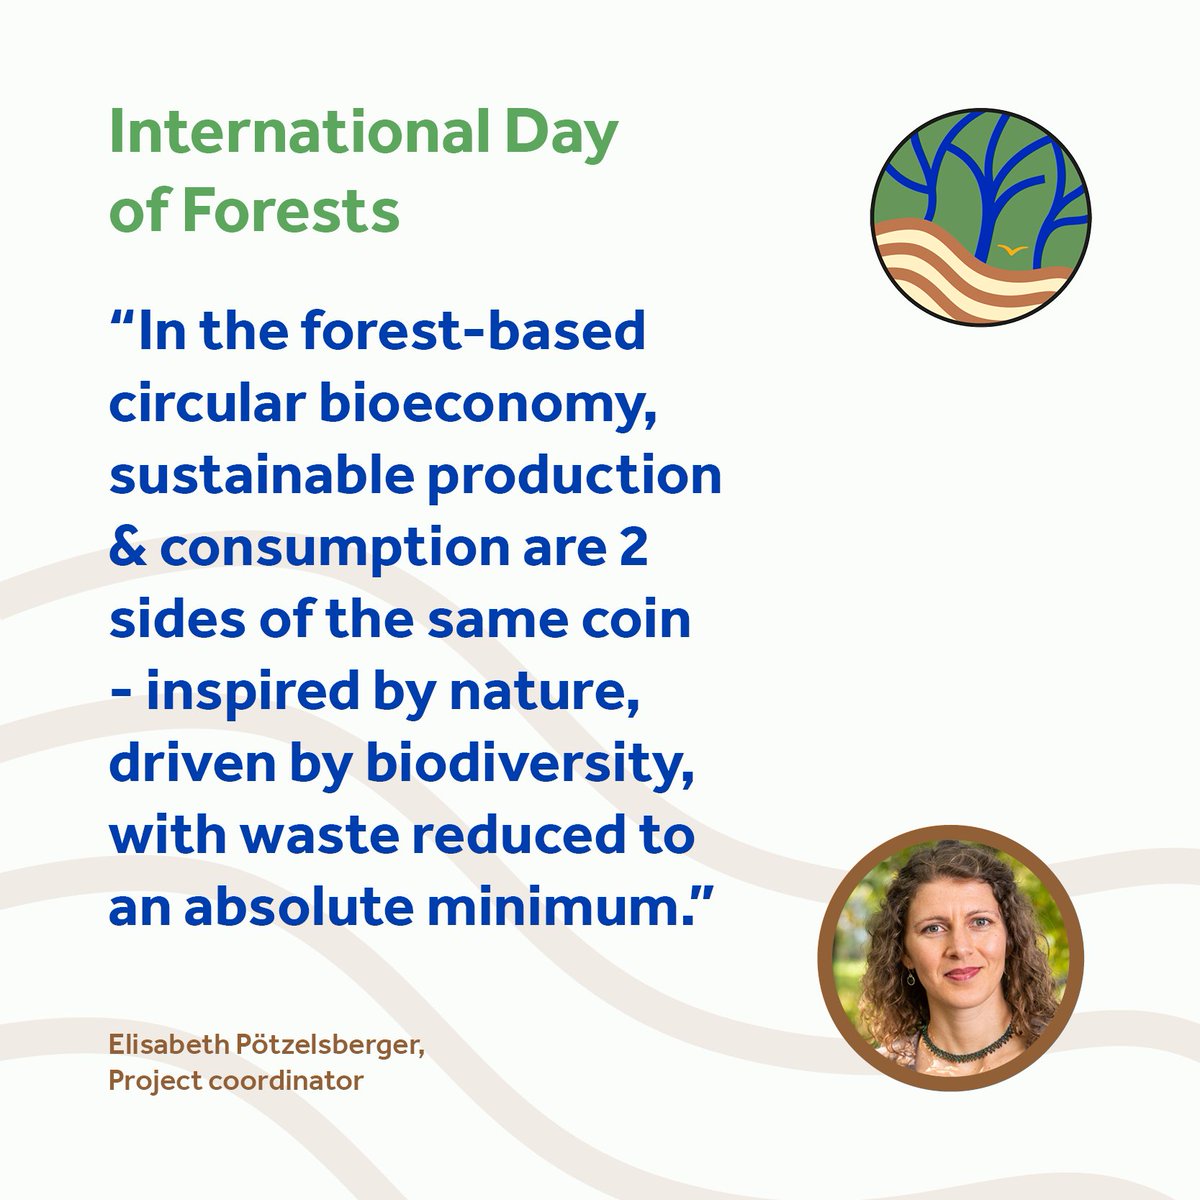 Happy #IntDayofForests🌲! With SUPERB, we will restore thousands of ha in 12 European countries together with local communities, landowners & other partners🤝. This is how we contribute to #sustainableproduction & consumption of forest-based products. #UpscalingForestRestoration